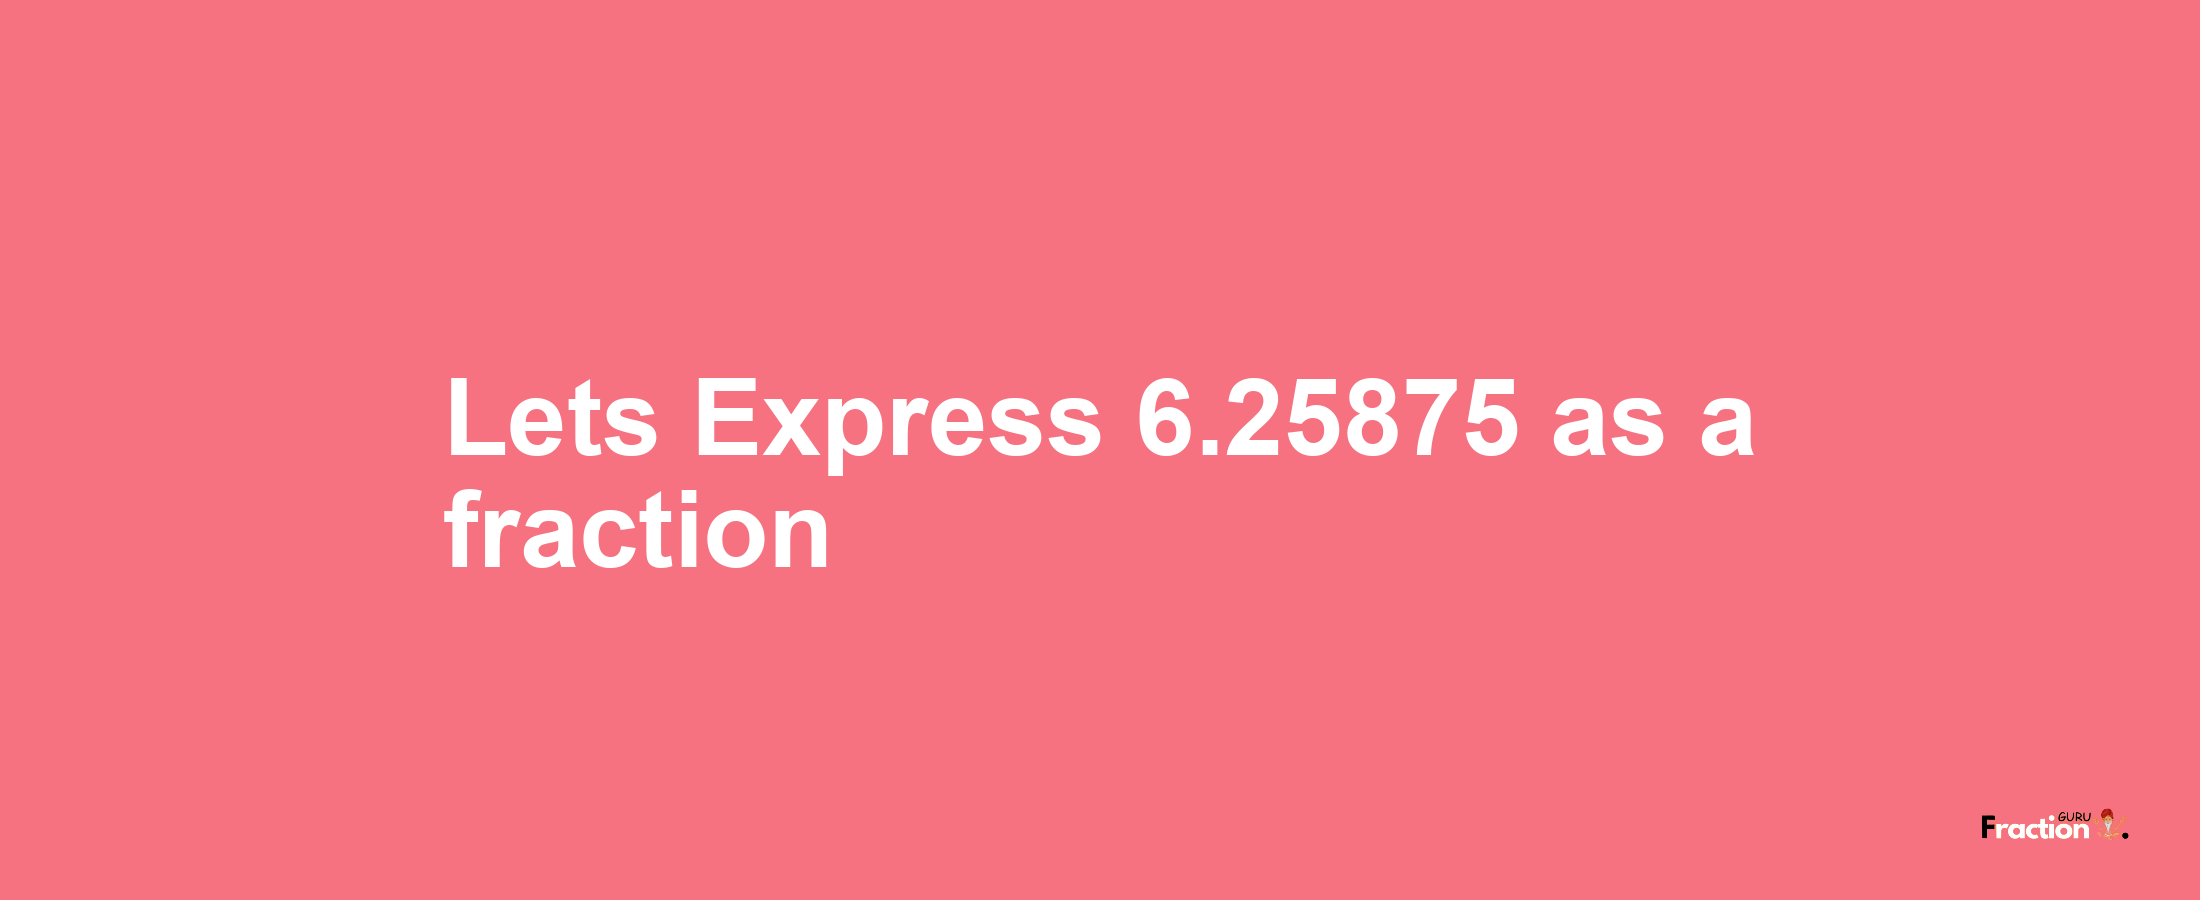 Lets Express 6.25875 as afraction